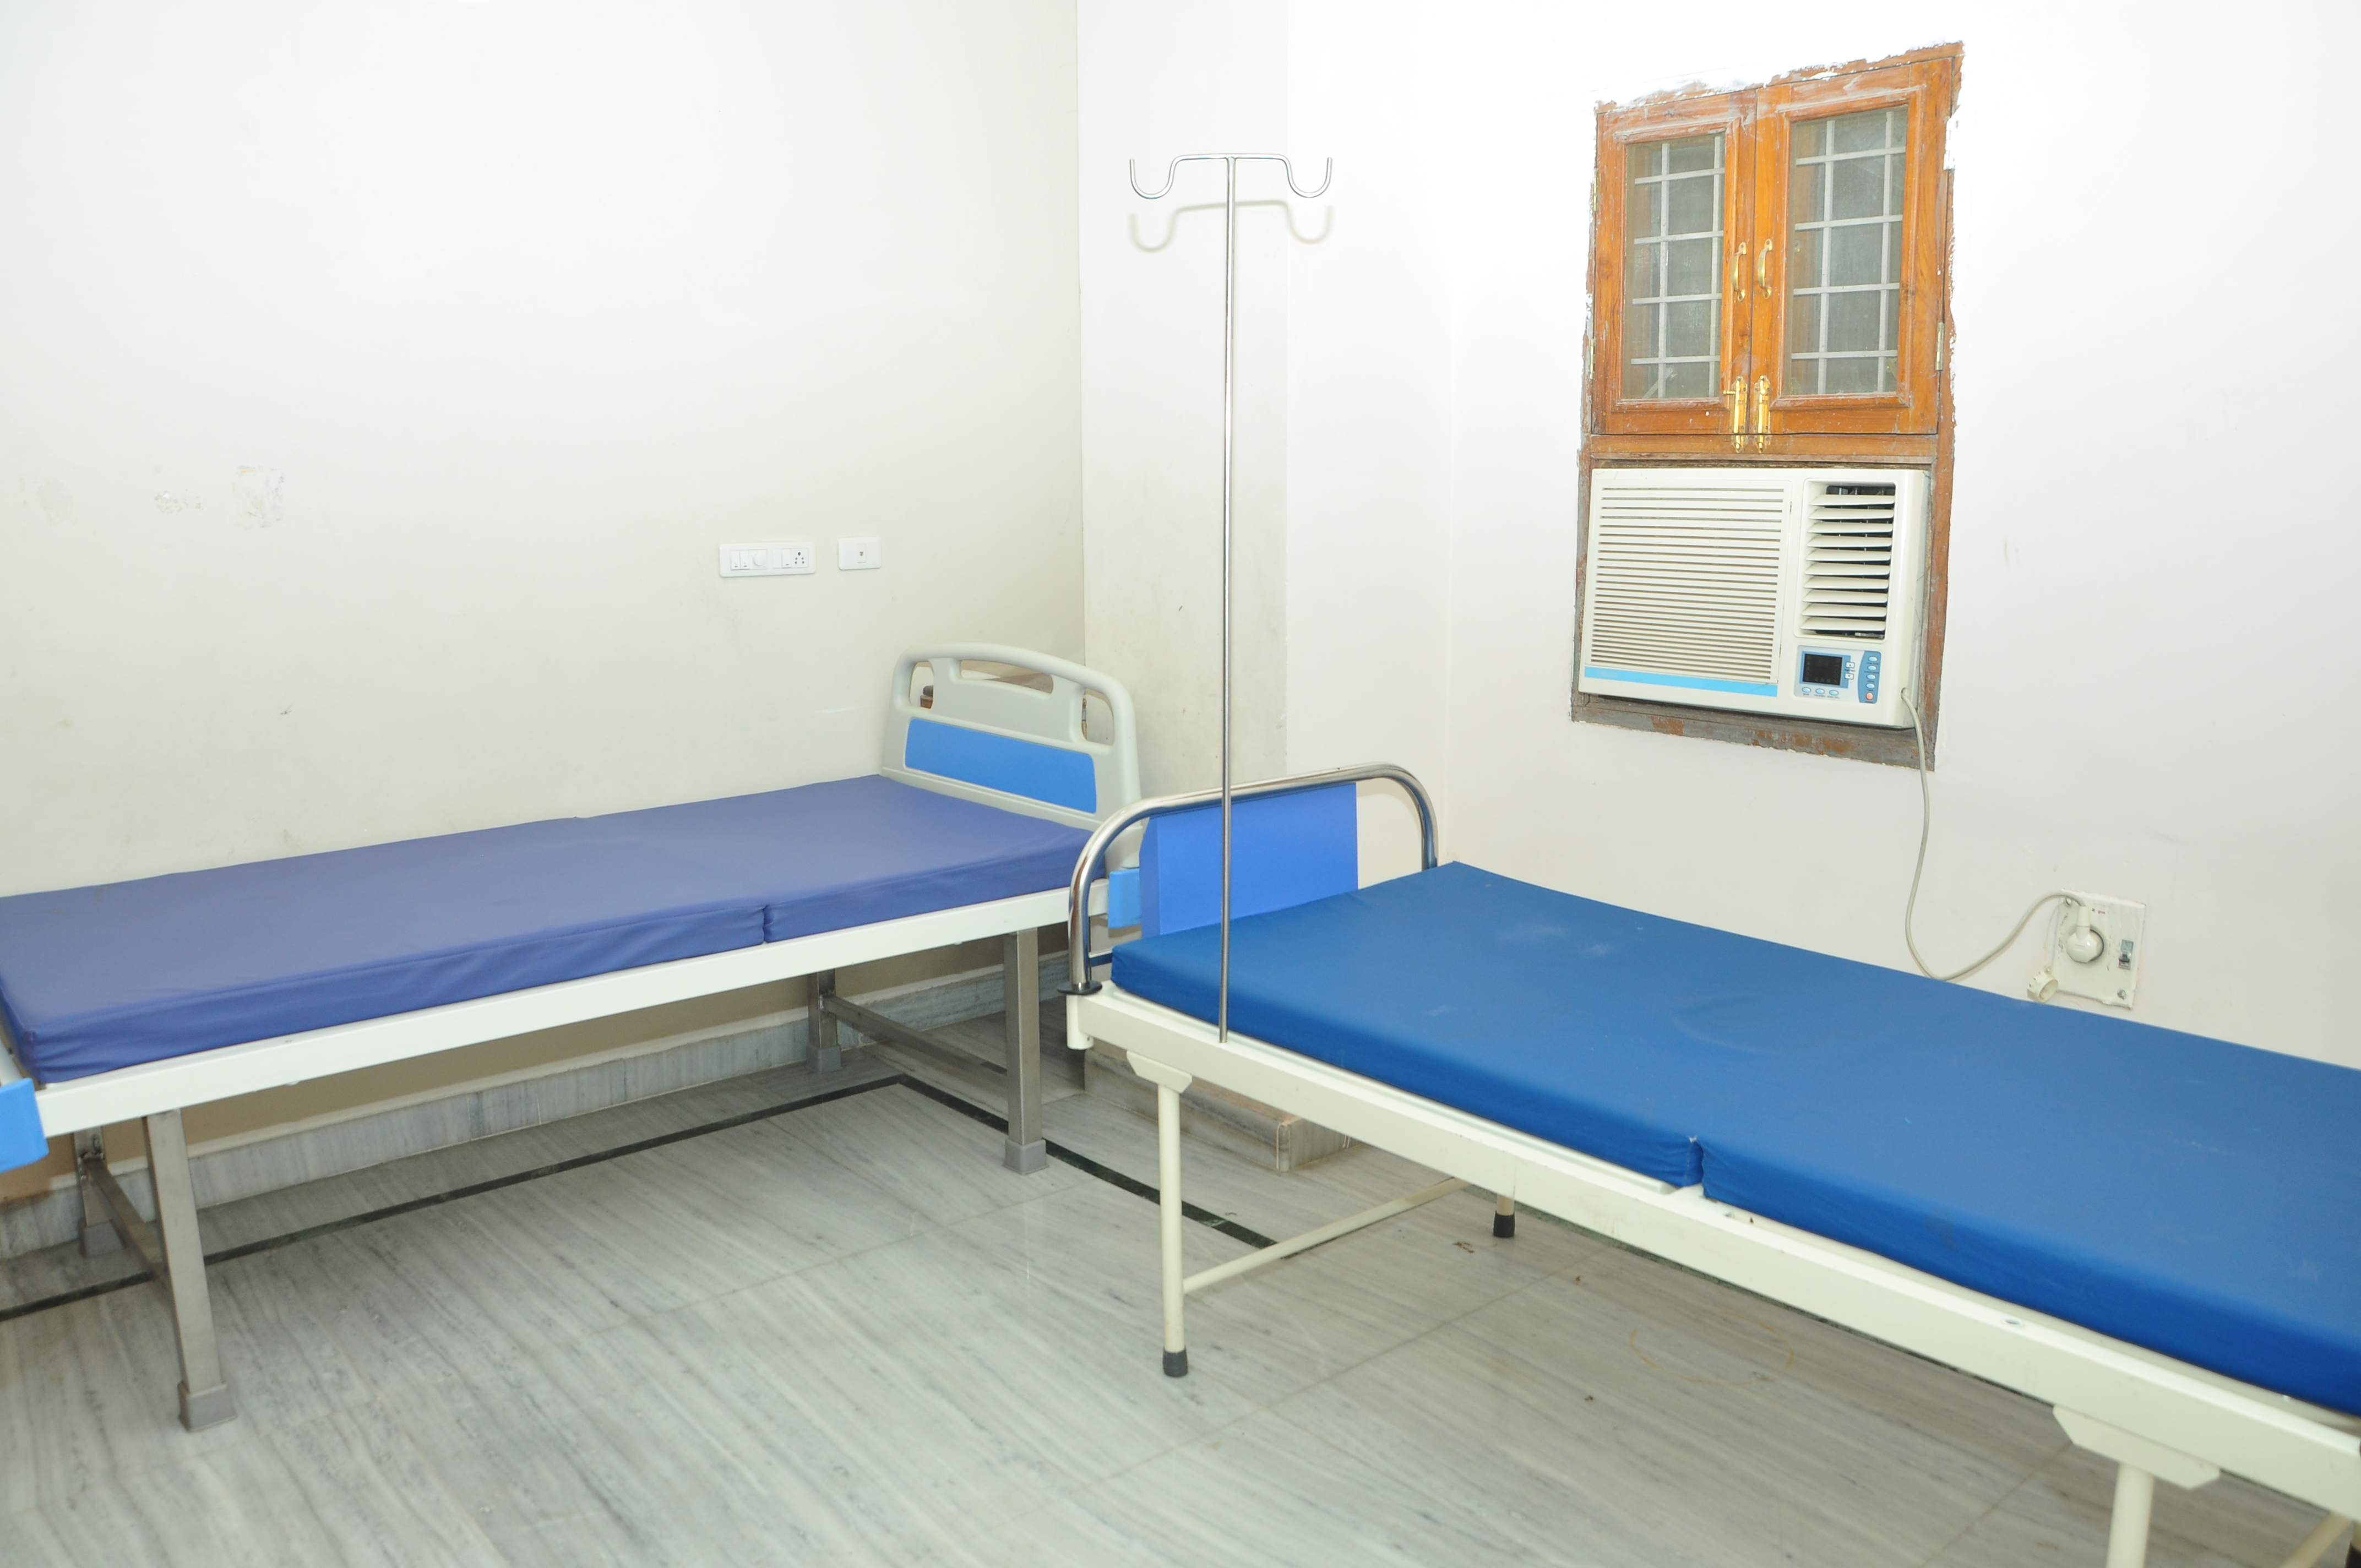 Bed allocation for patient